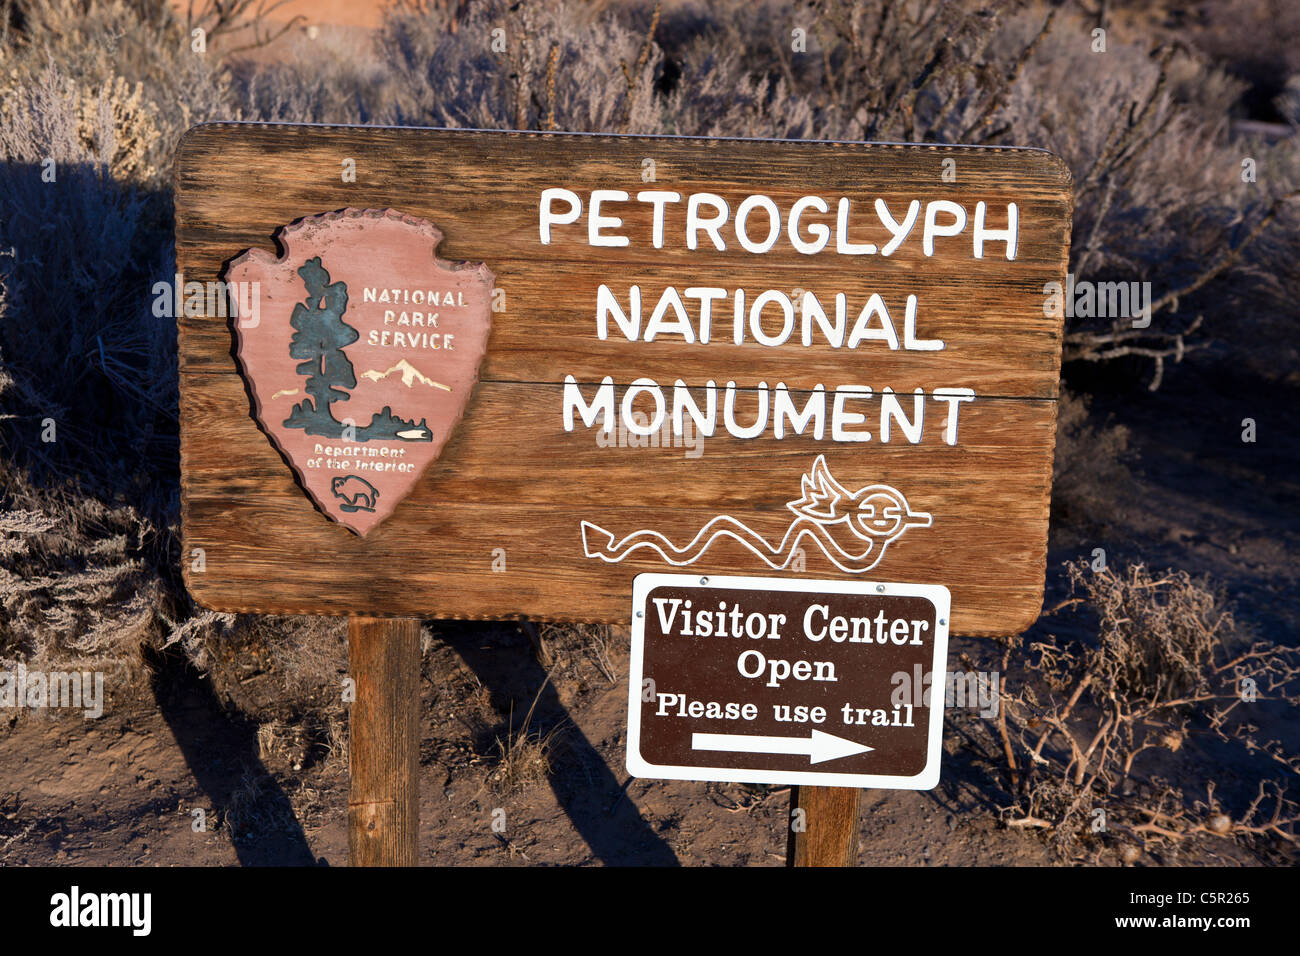 National Park Service welcome sign to visitor center, Petroglyph National Monument, Albuquerque, New Mexico, USA Stock Photo